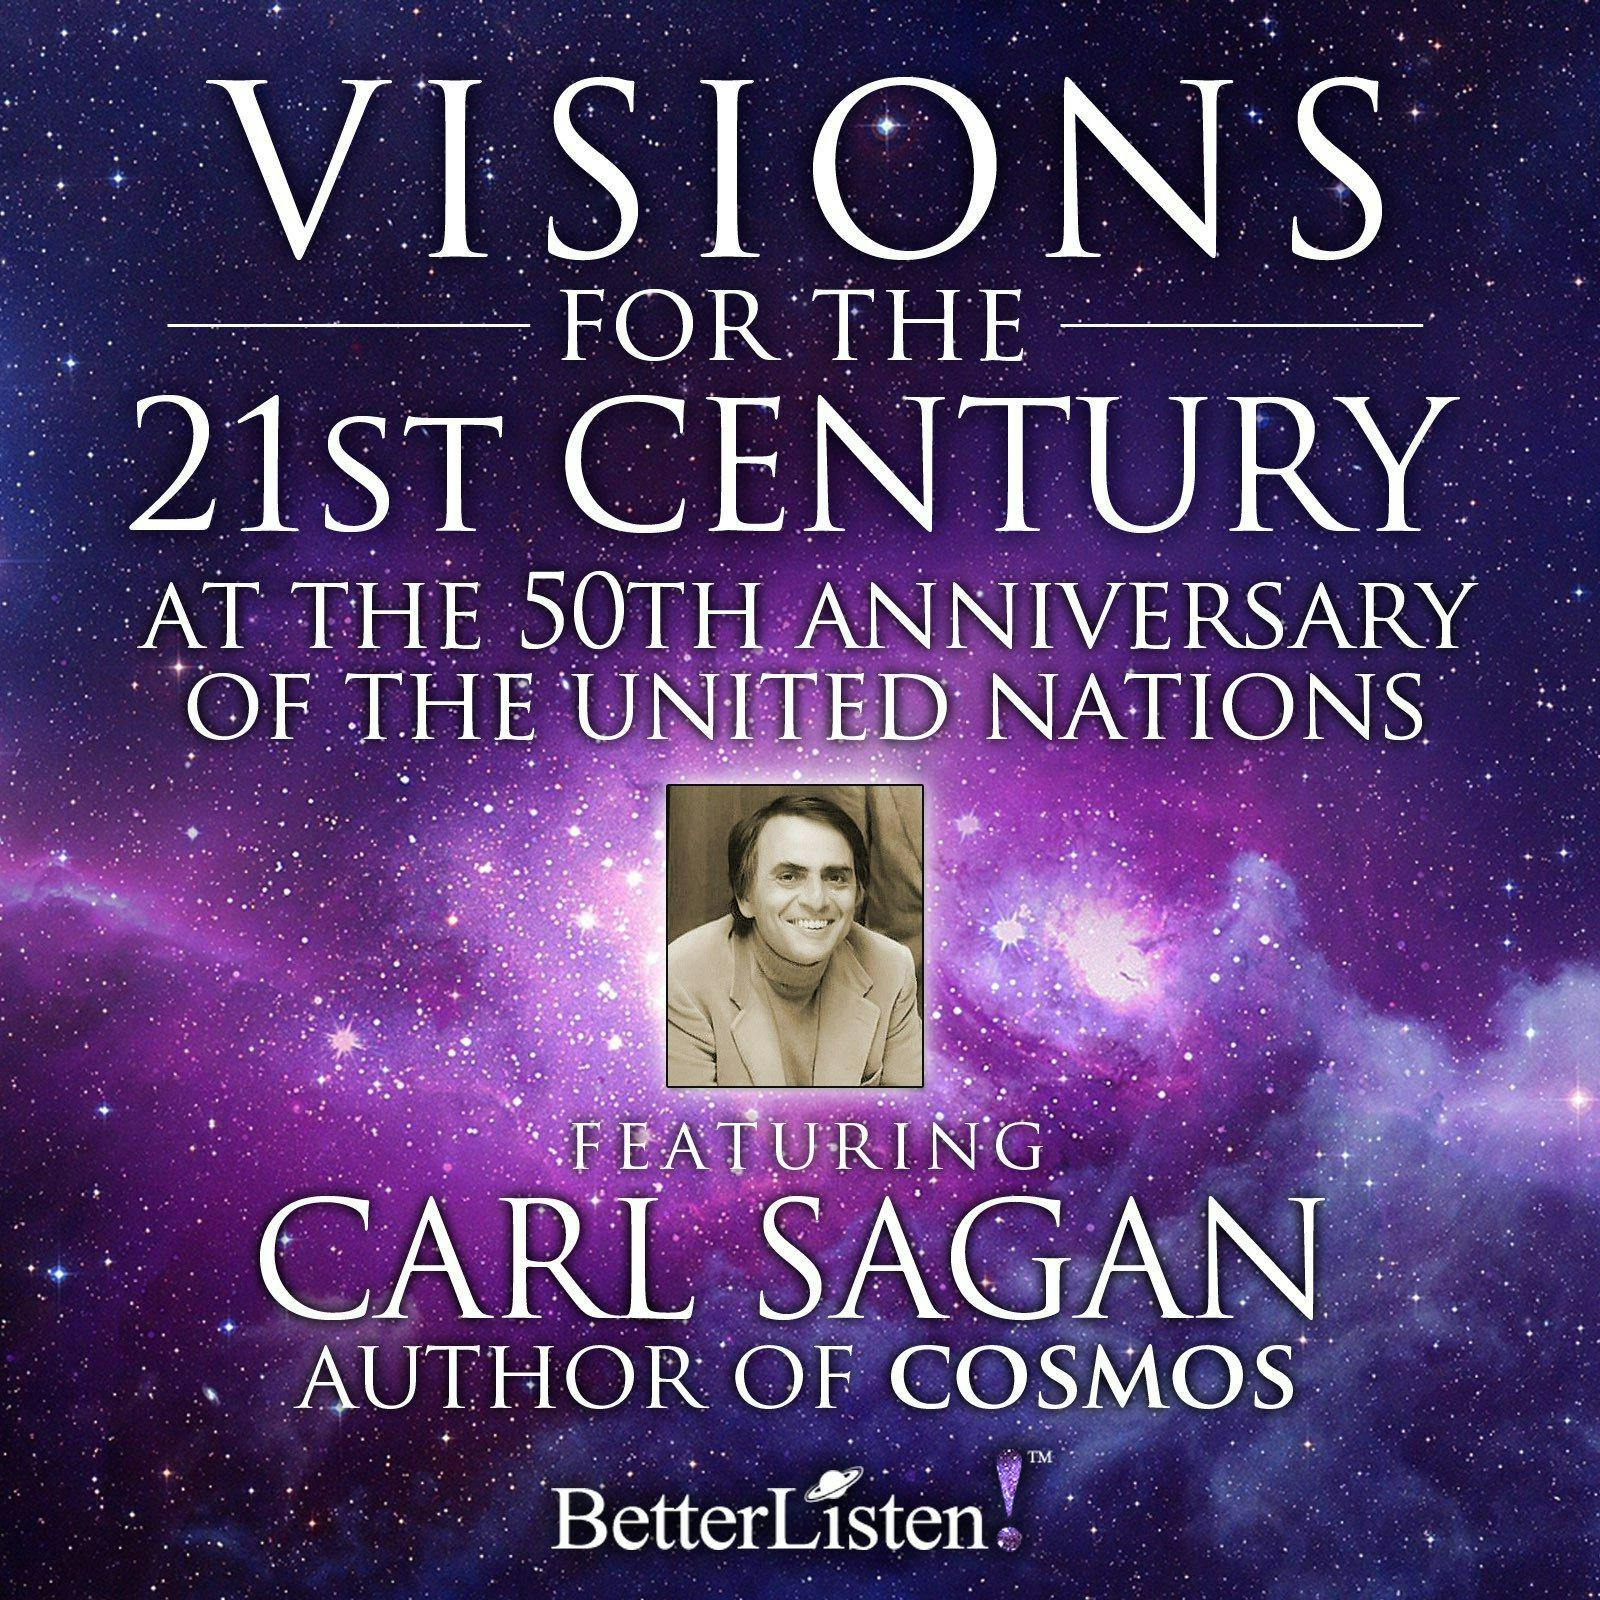 Visions for the 21st Century: At the 50th Anniversary of The United Nations - Carl Sagan